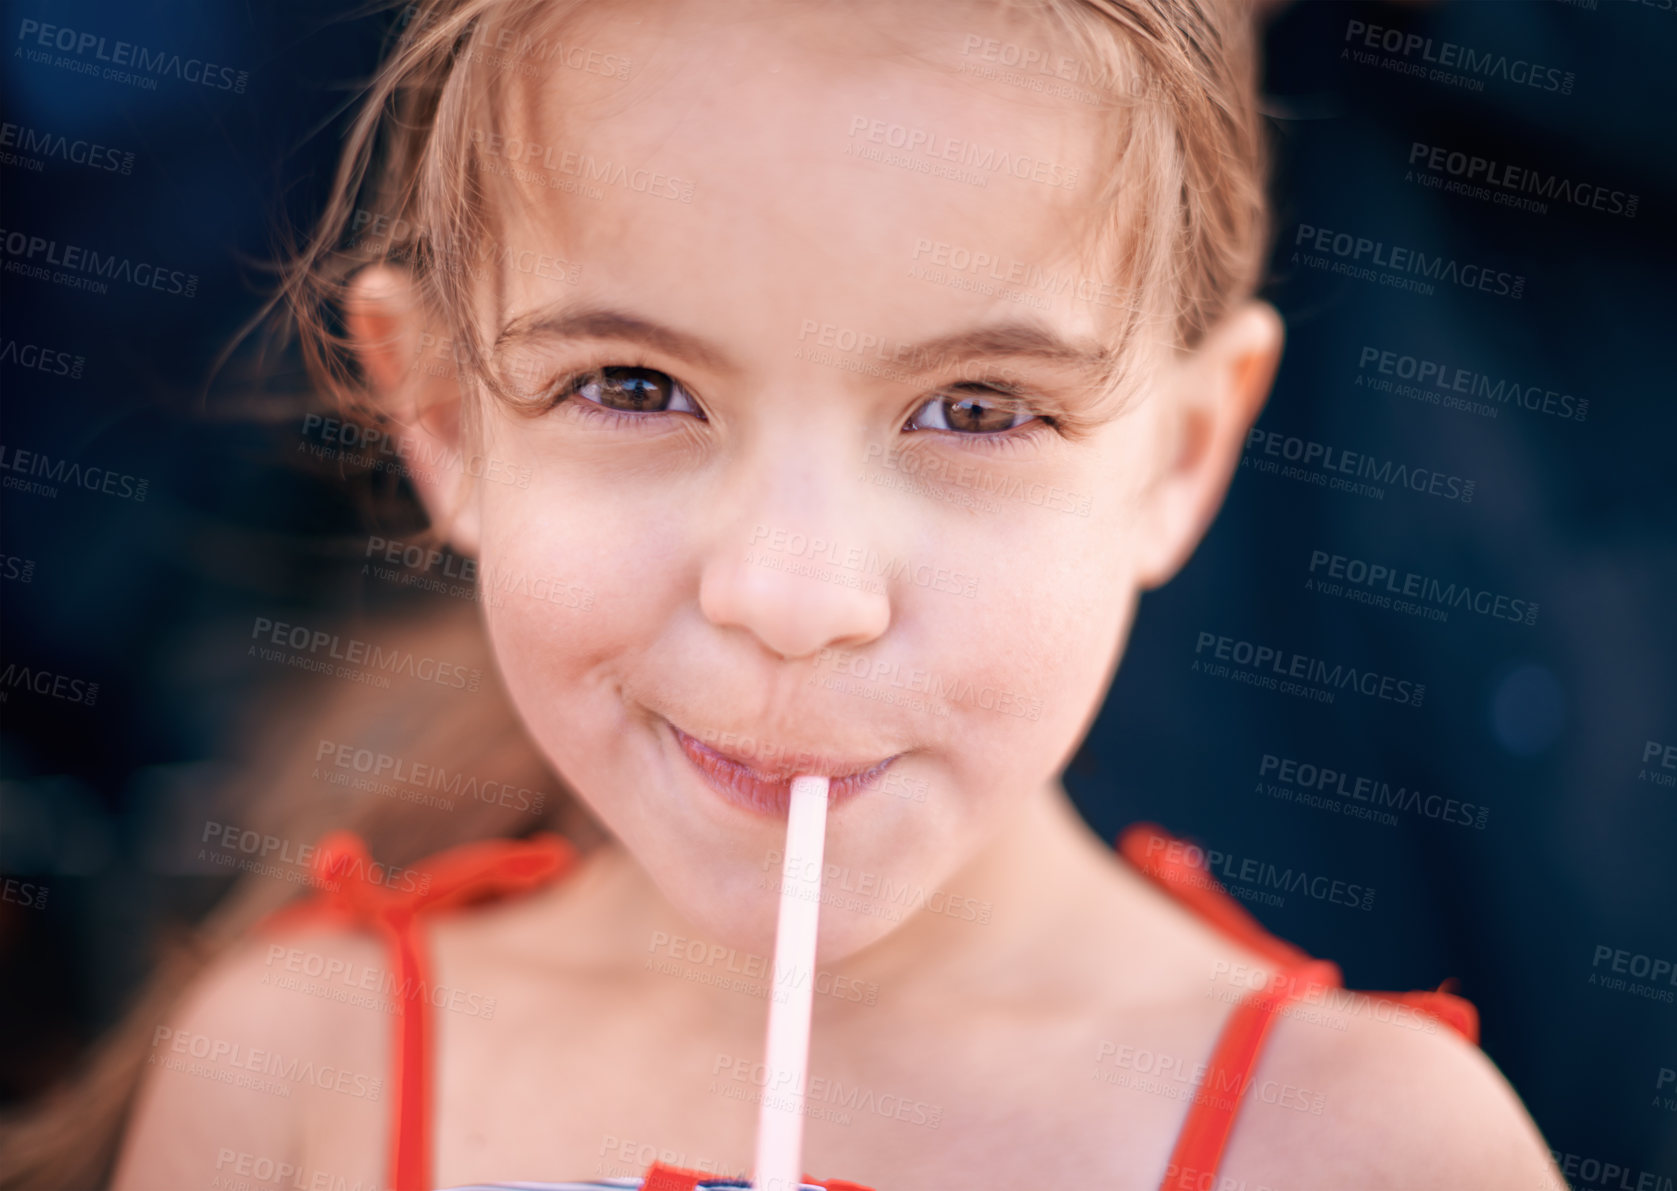 Buy stock photo Shot of a little girl drinking a beverage outdoors